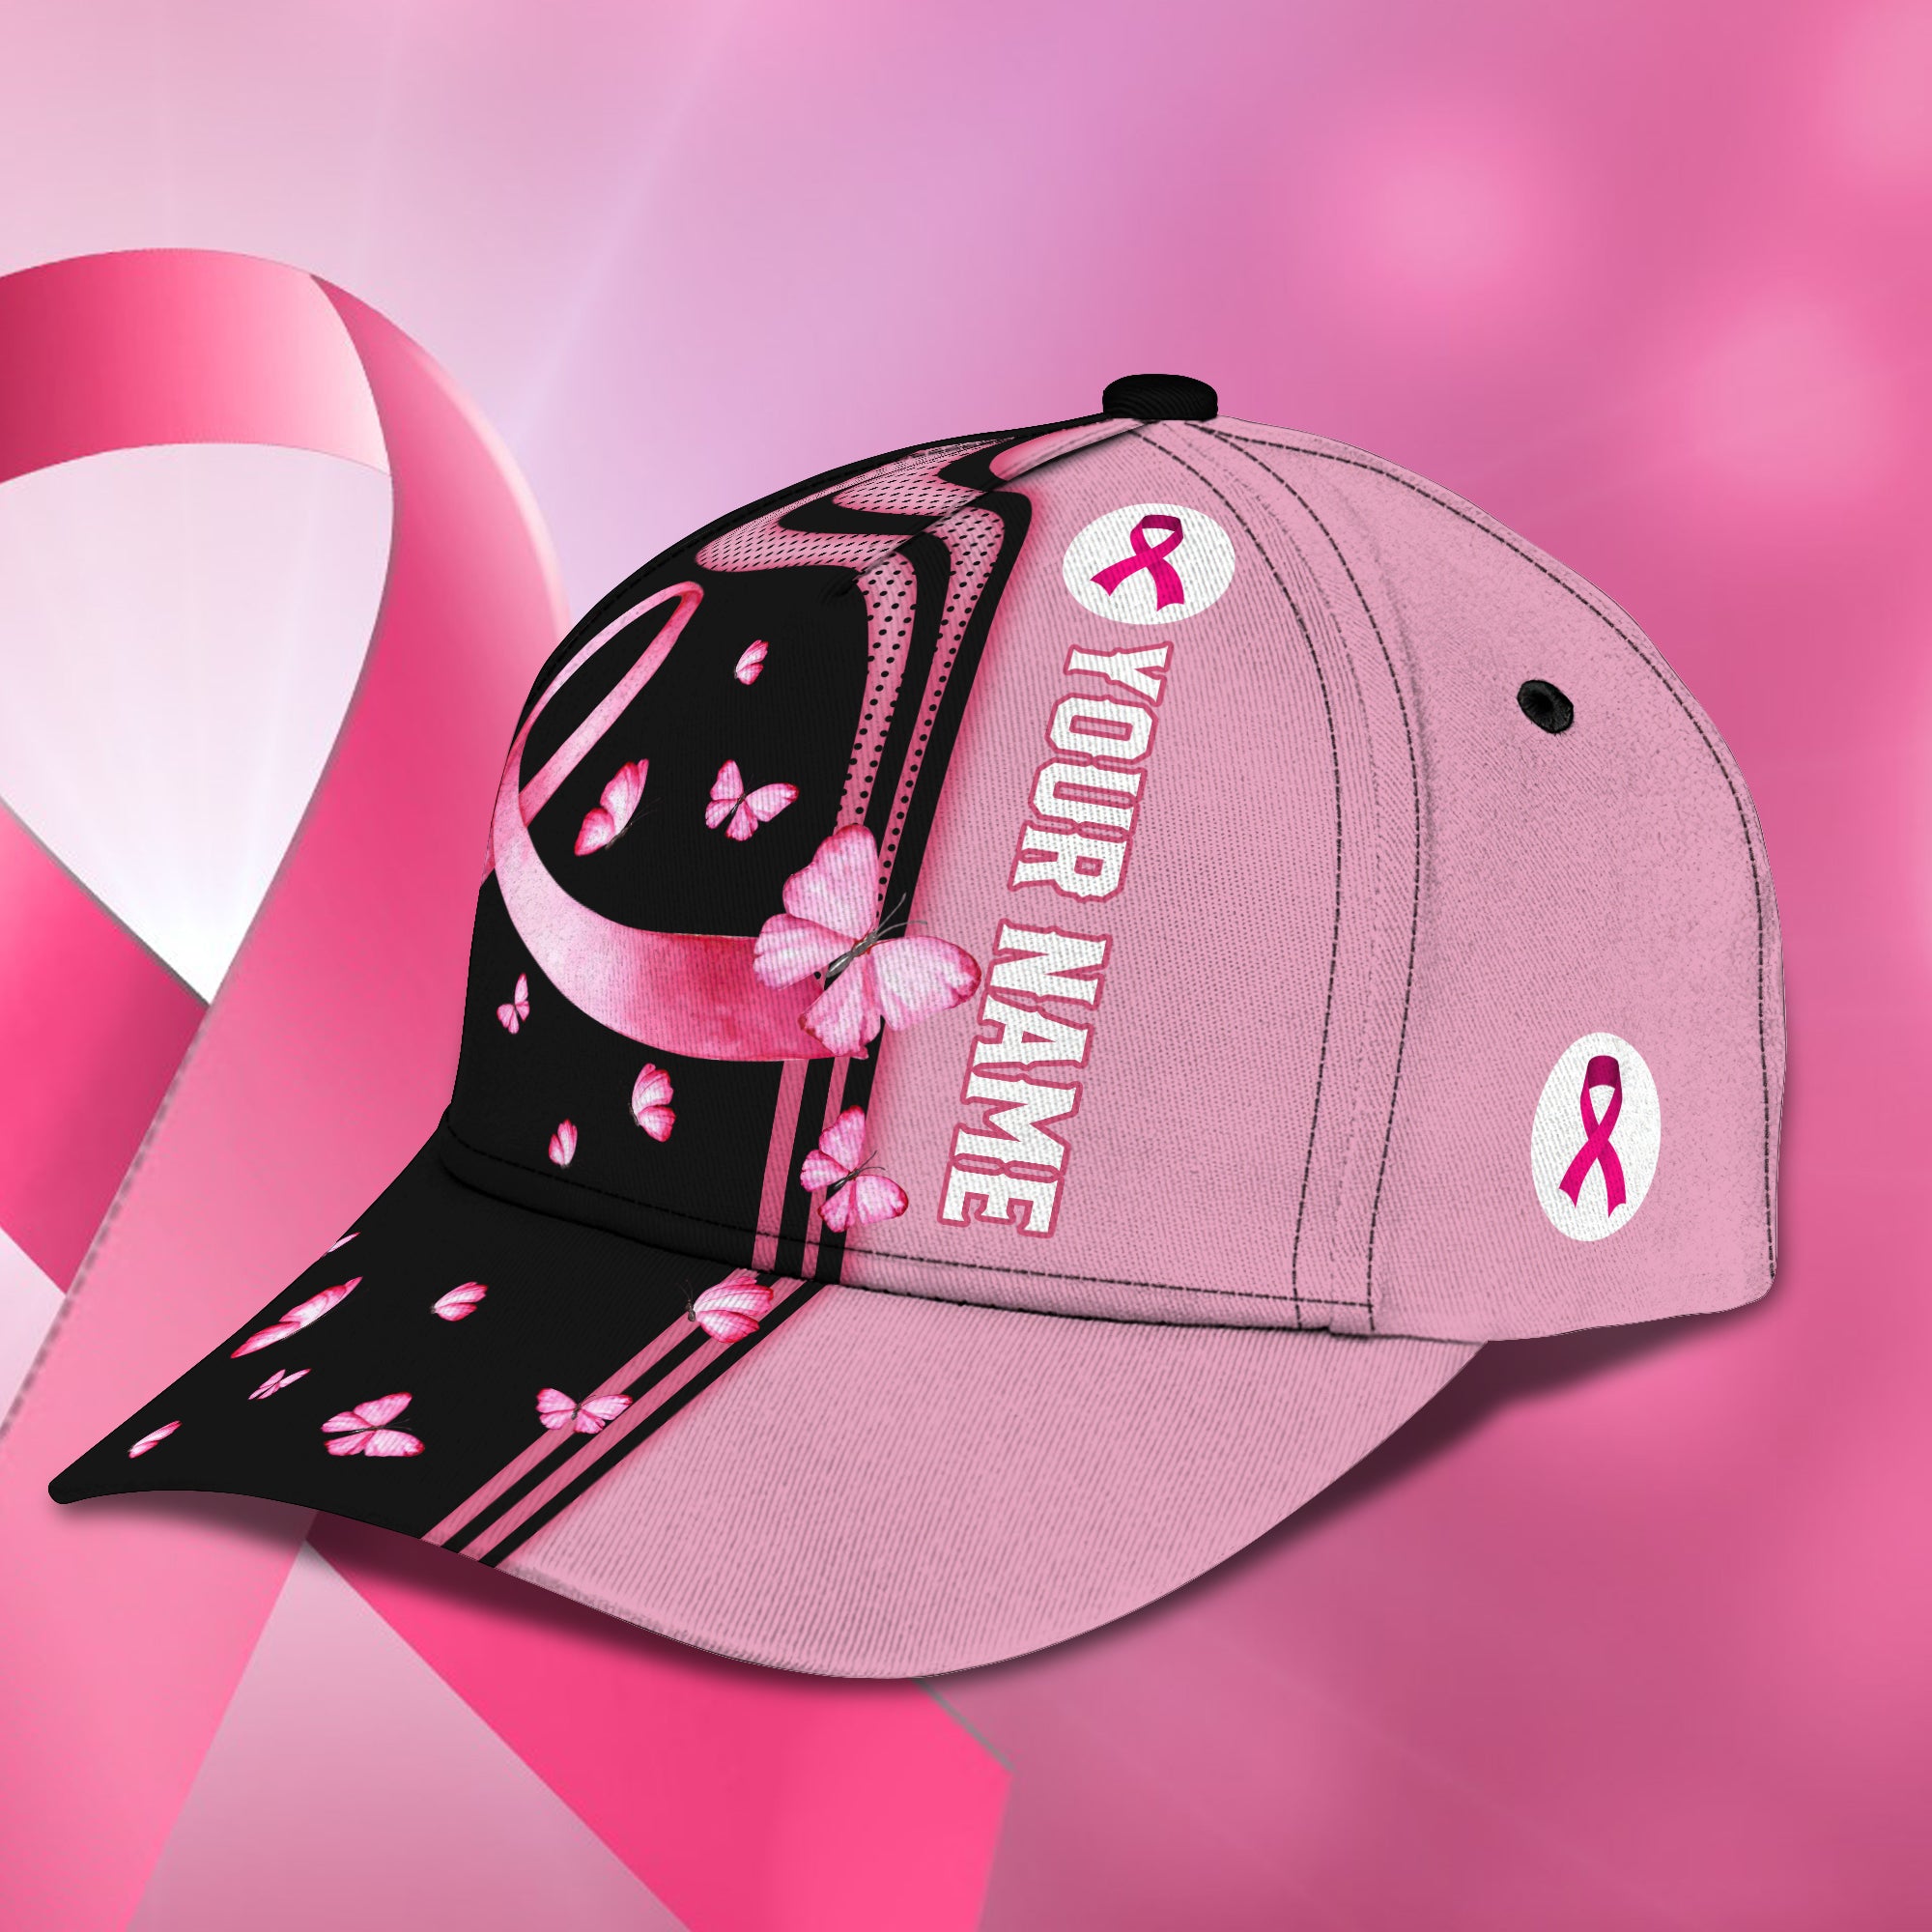 Believe-Breast Cancer Awareness - Personalized Name Cap - Lta98-57